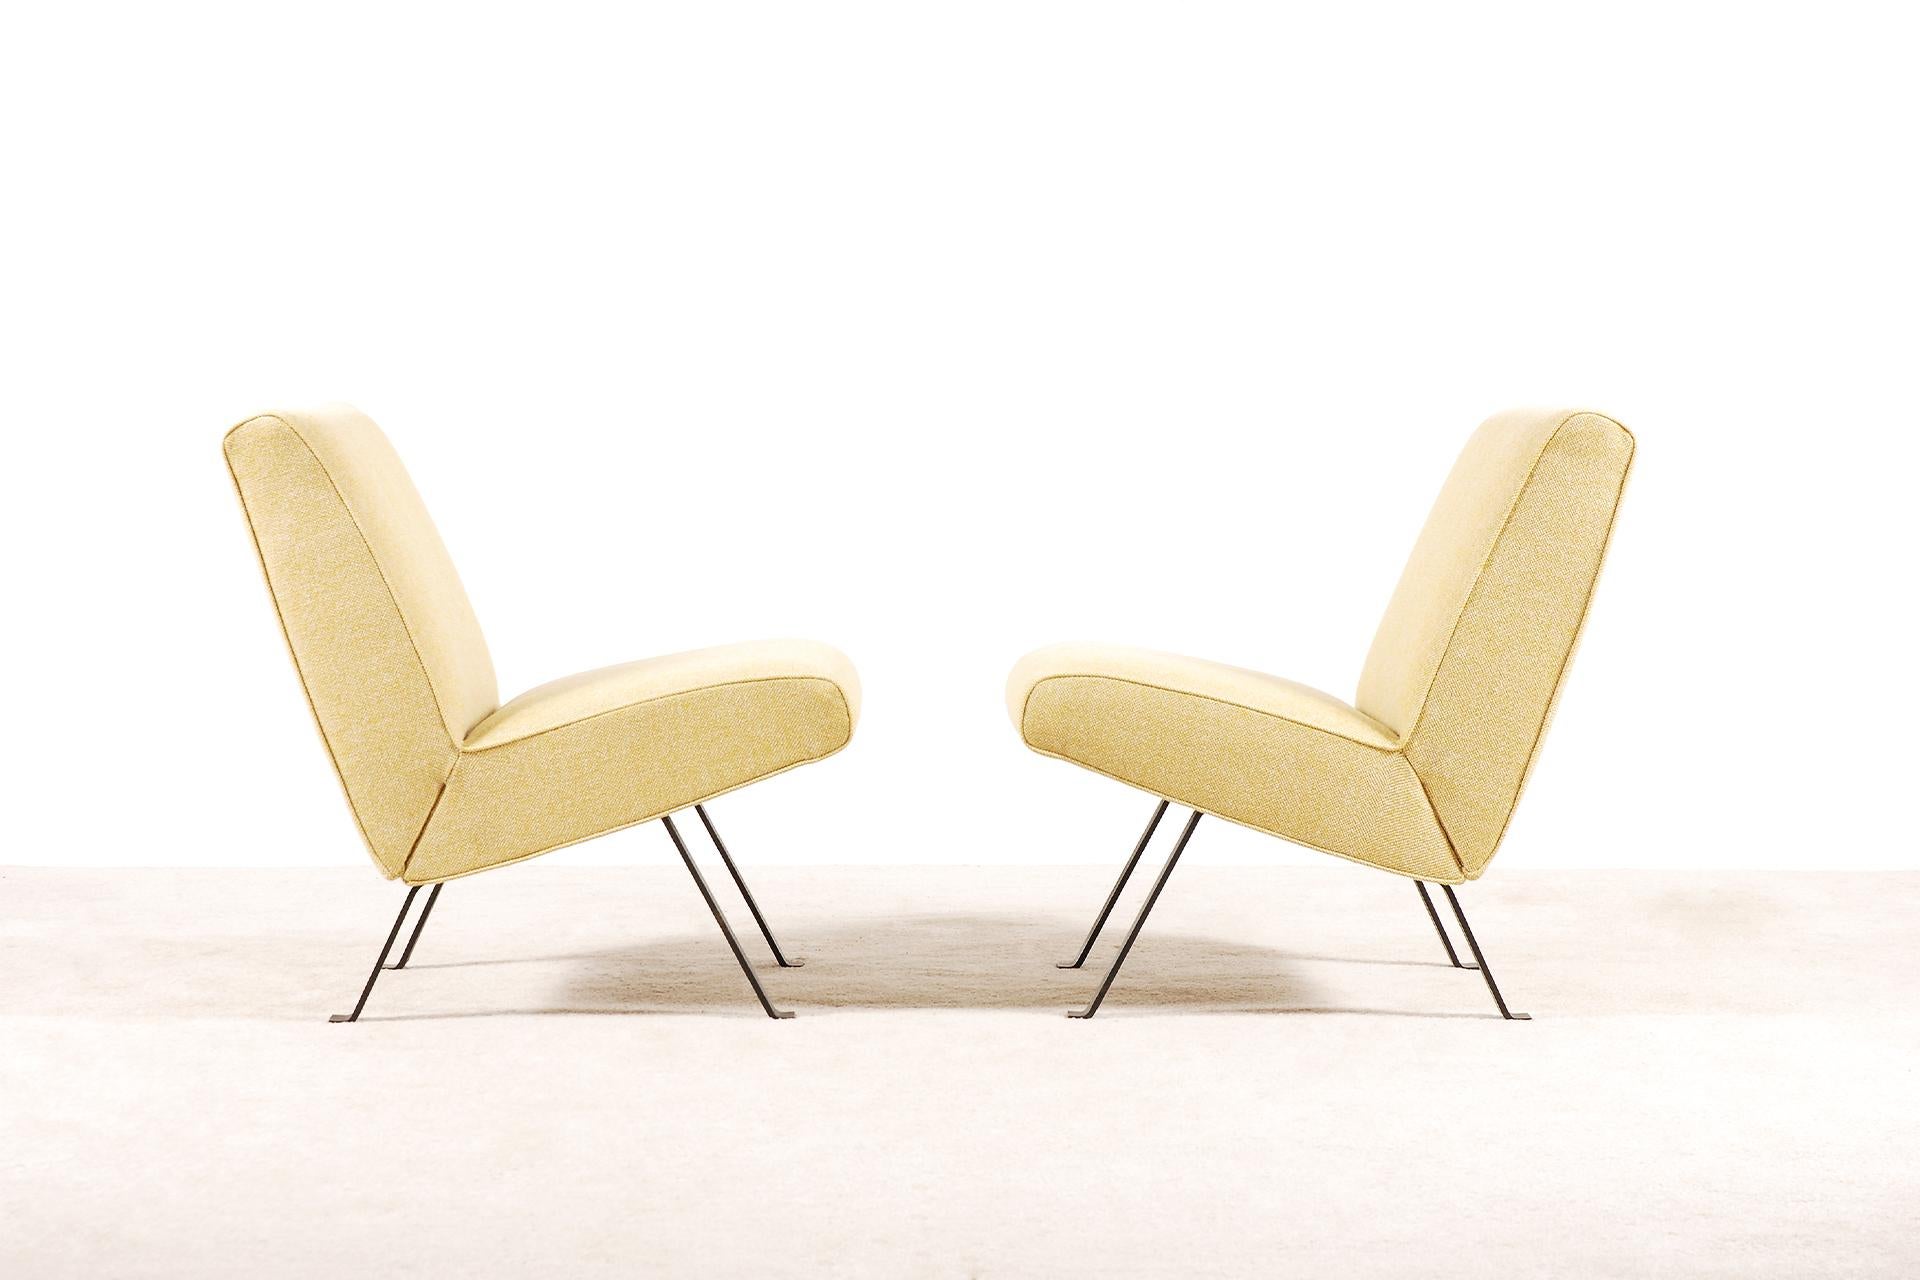 French Joseph-André Motte, Pair of Lounge Chairs Model 740 for Steiner, 1957